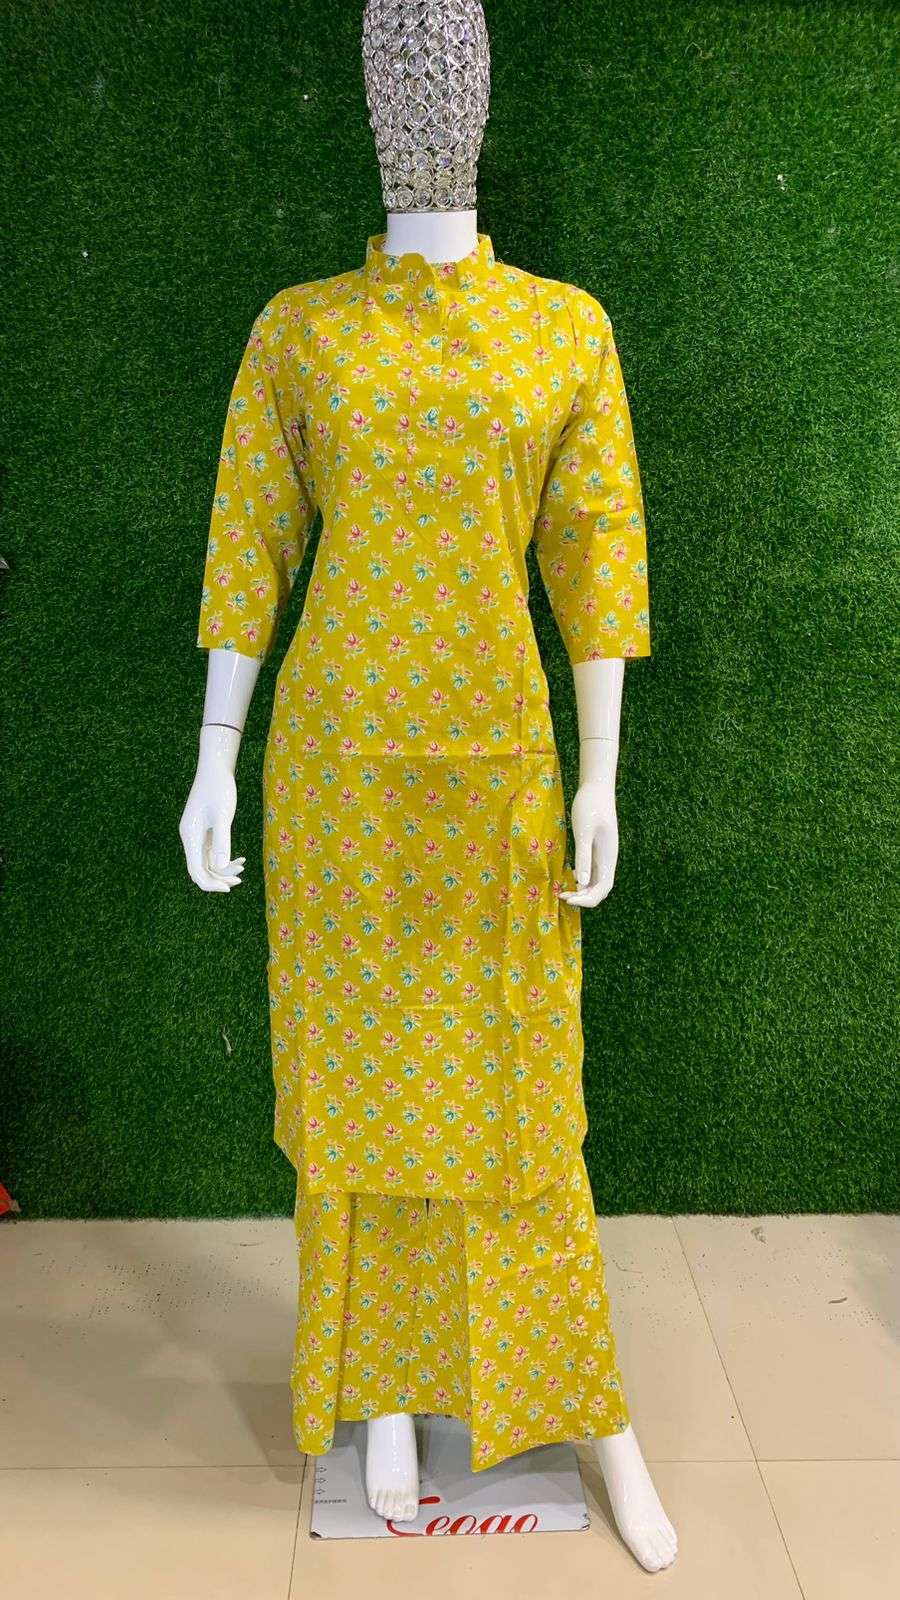 BEMITEX INDIA PRESENT COTTON 60-60 FABRIC LATEST YELLOW READYMADE 2 PIECE COMBO COLLECTION WHOLESALE SHOP IN SURAT